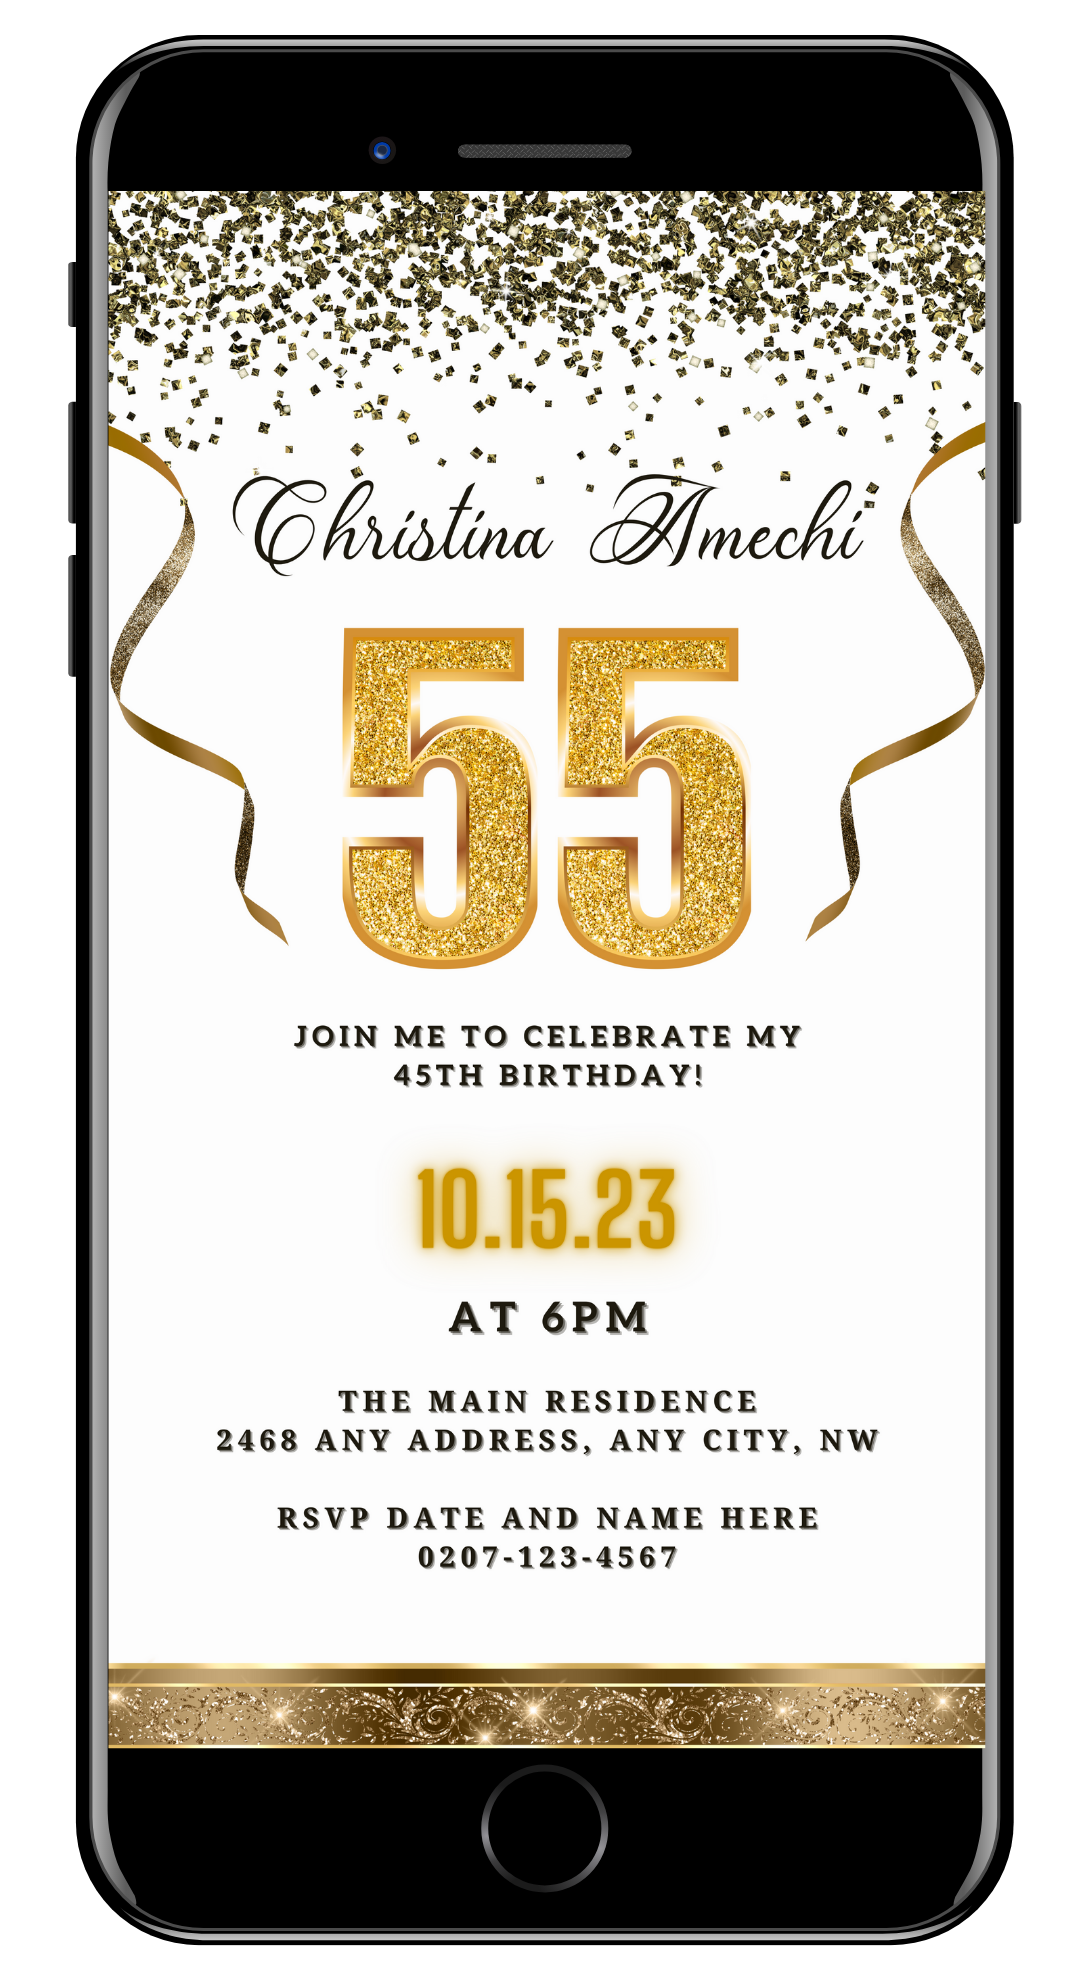 Customizable White Gold Confetti 55th Birthday Evite displayed on a smartphone screen, featuring gold text and ribbons for personalizing event details.